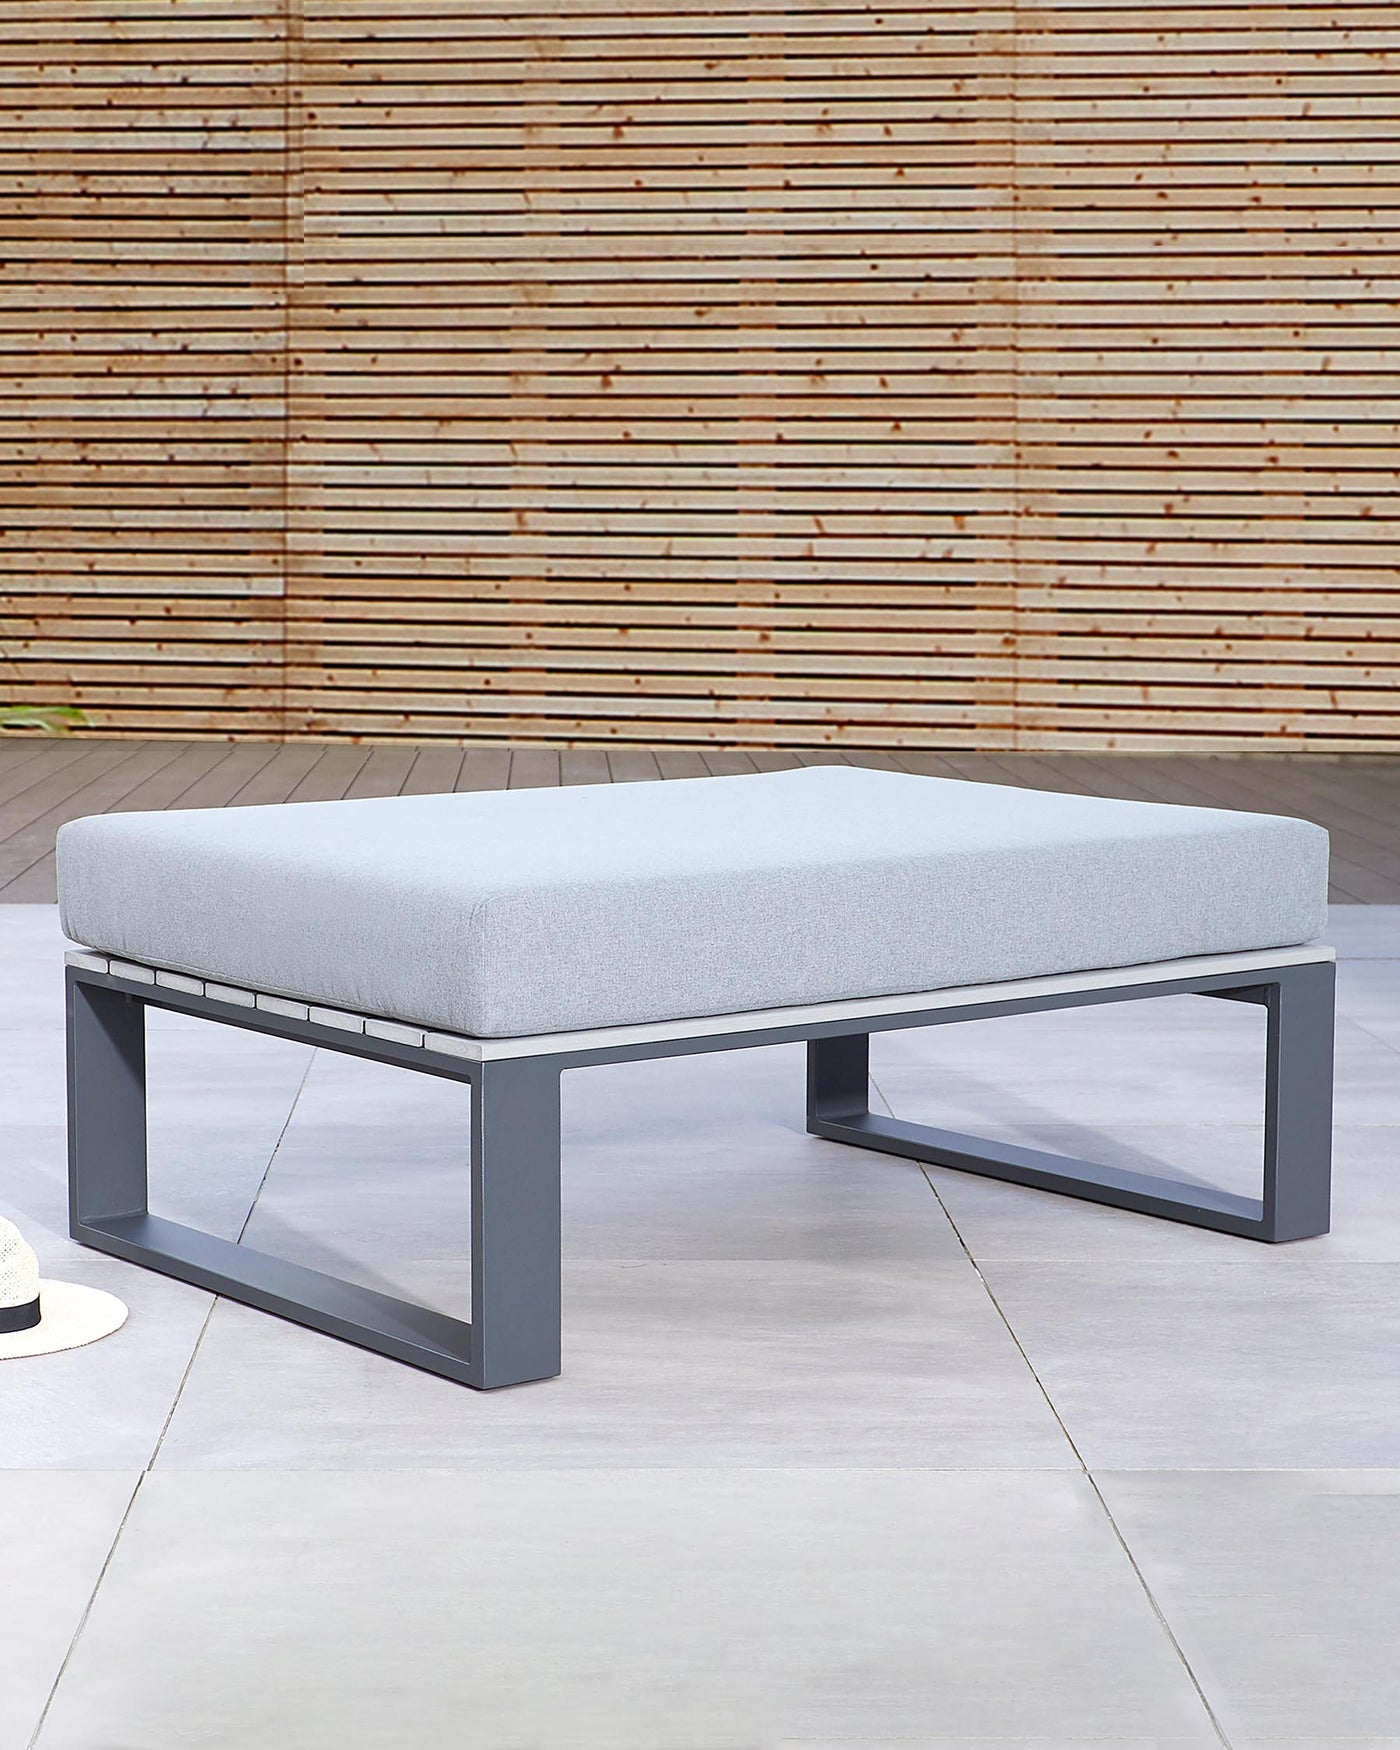 Modern rectangular ottoman with a light grey upholstered cushion top and a sleek, black metal base frame, set against a textured bamboo backdrop.